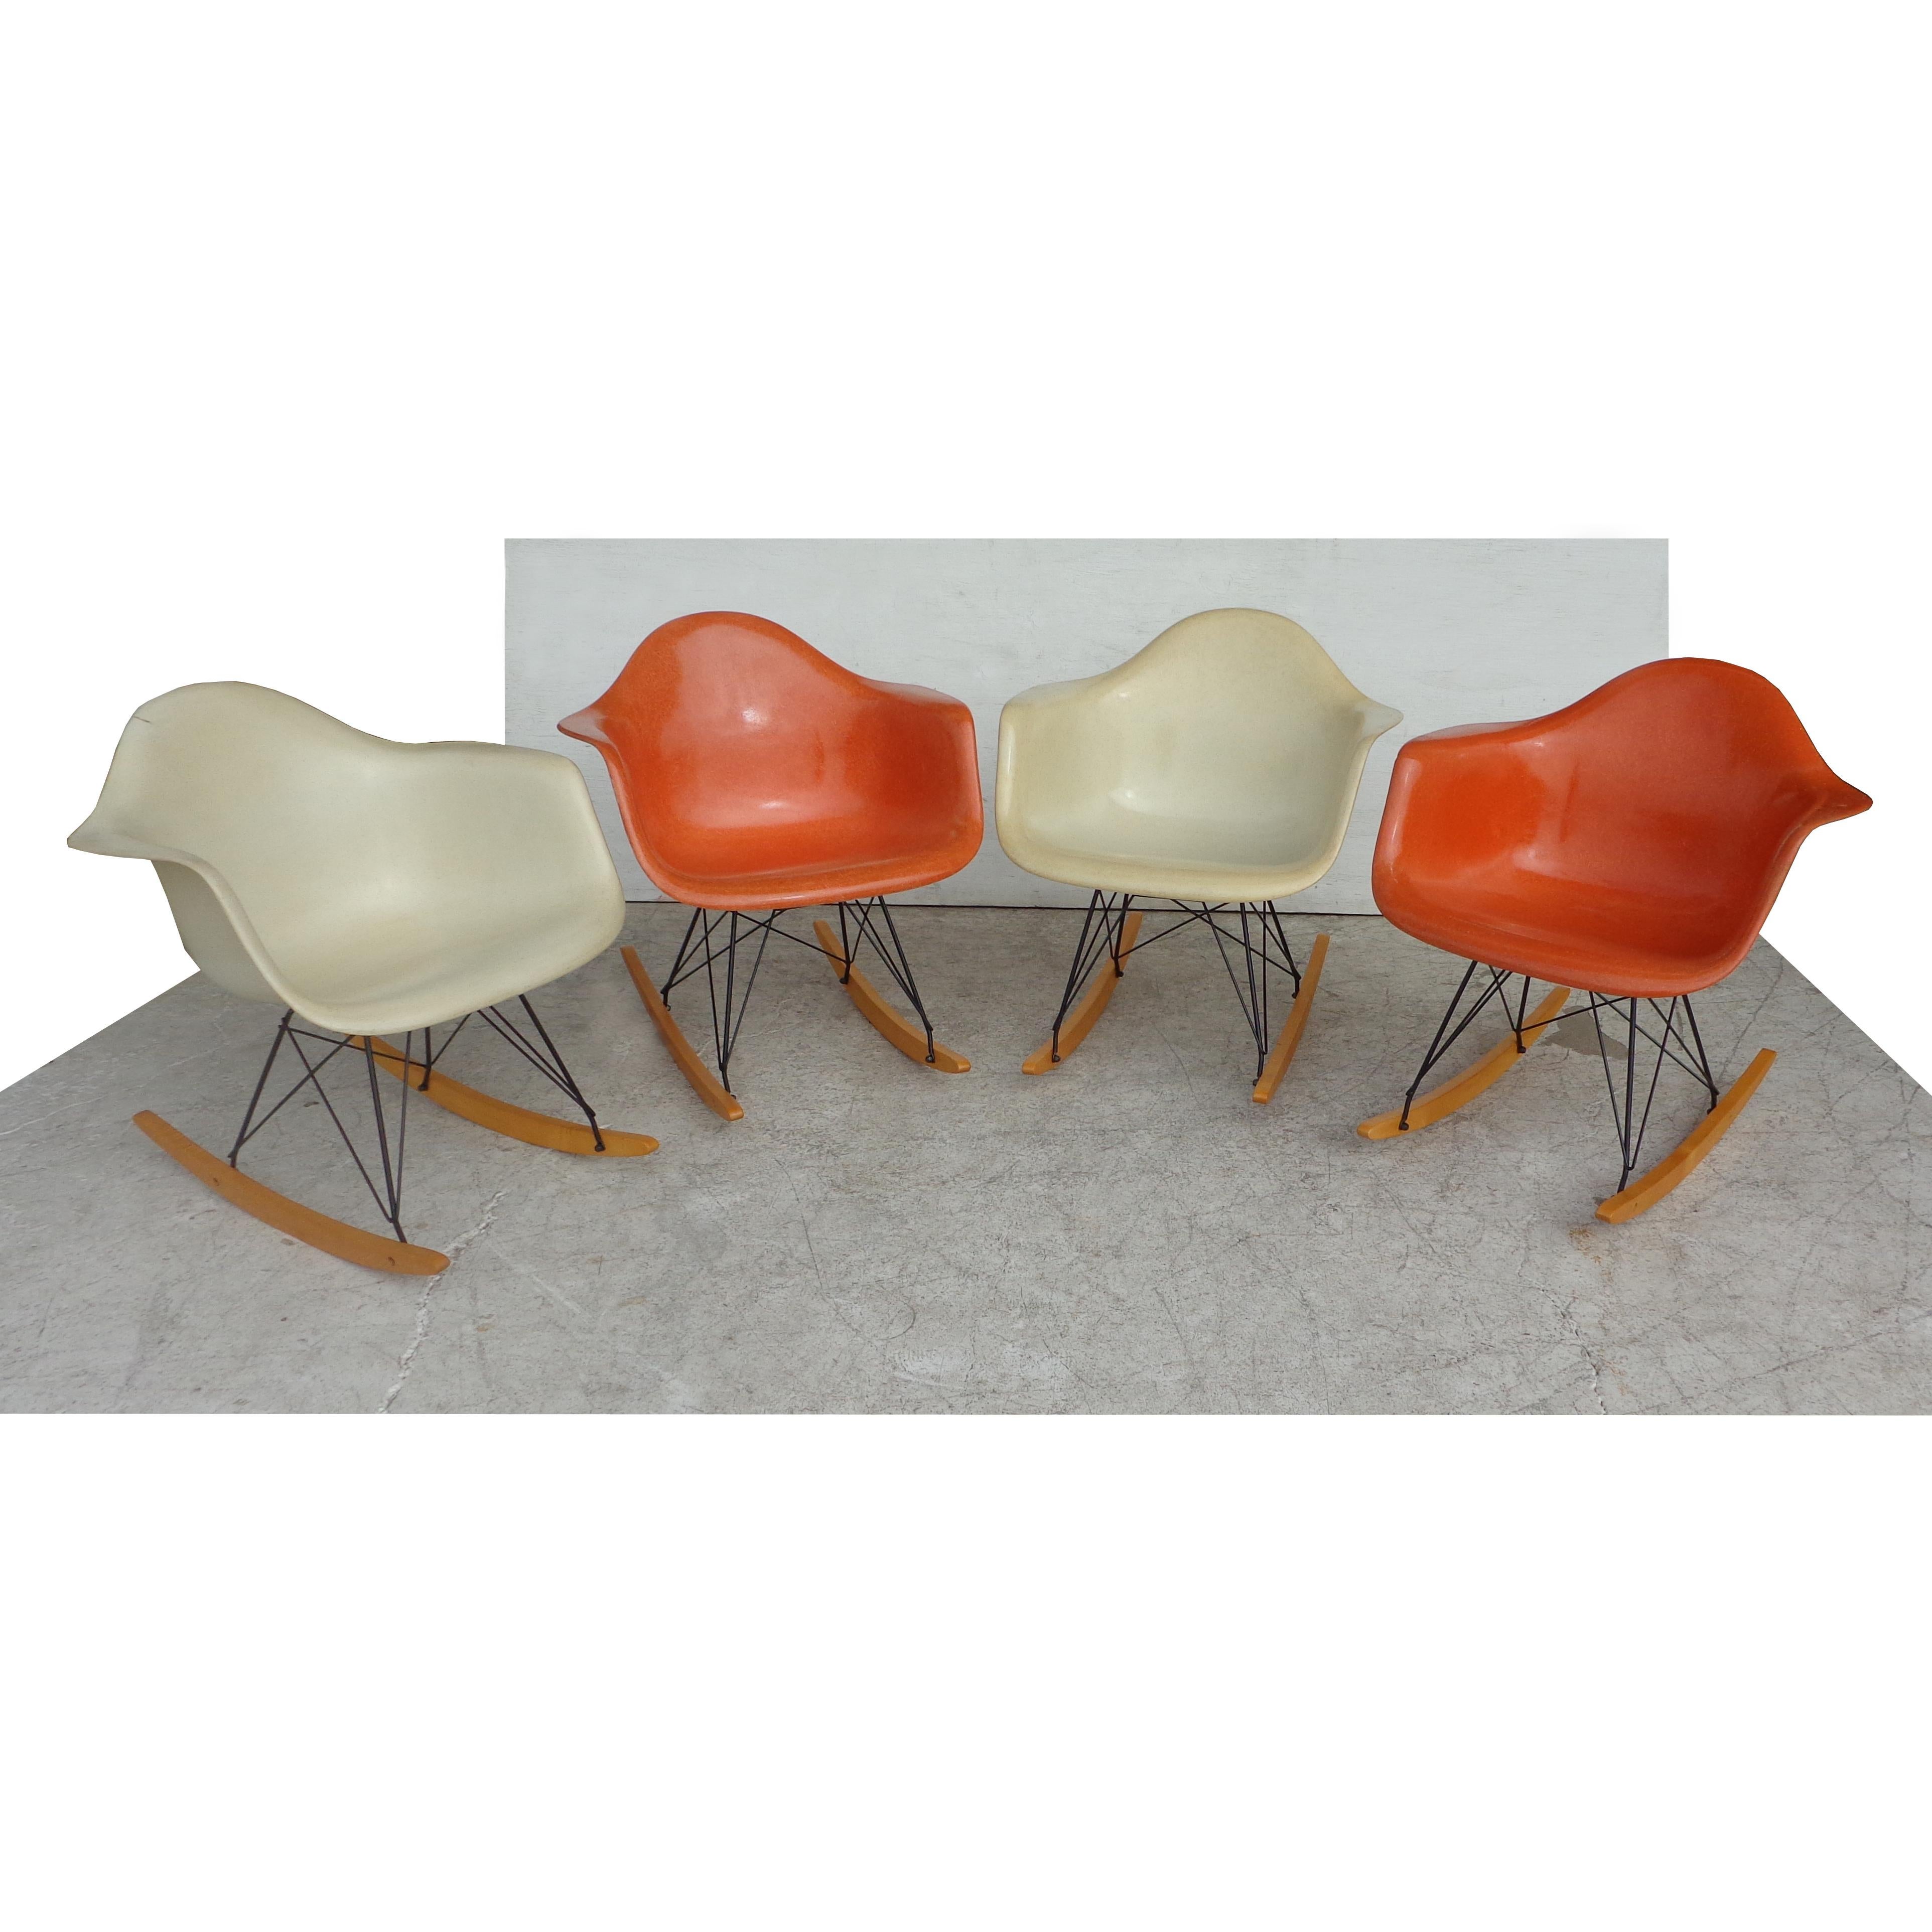 1 Herman Miller Parchment Shell Fiberglass RAR Rocker by Eames In Good Condition For Sale In Pasadena, TX